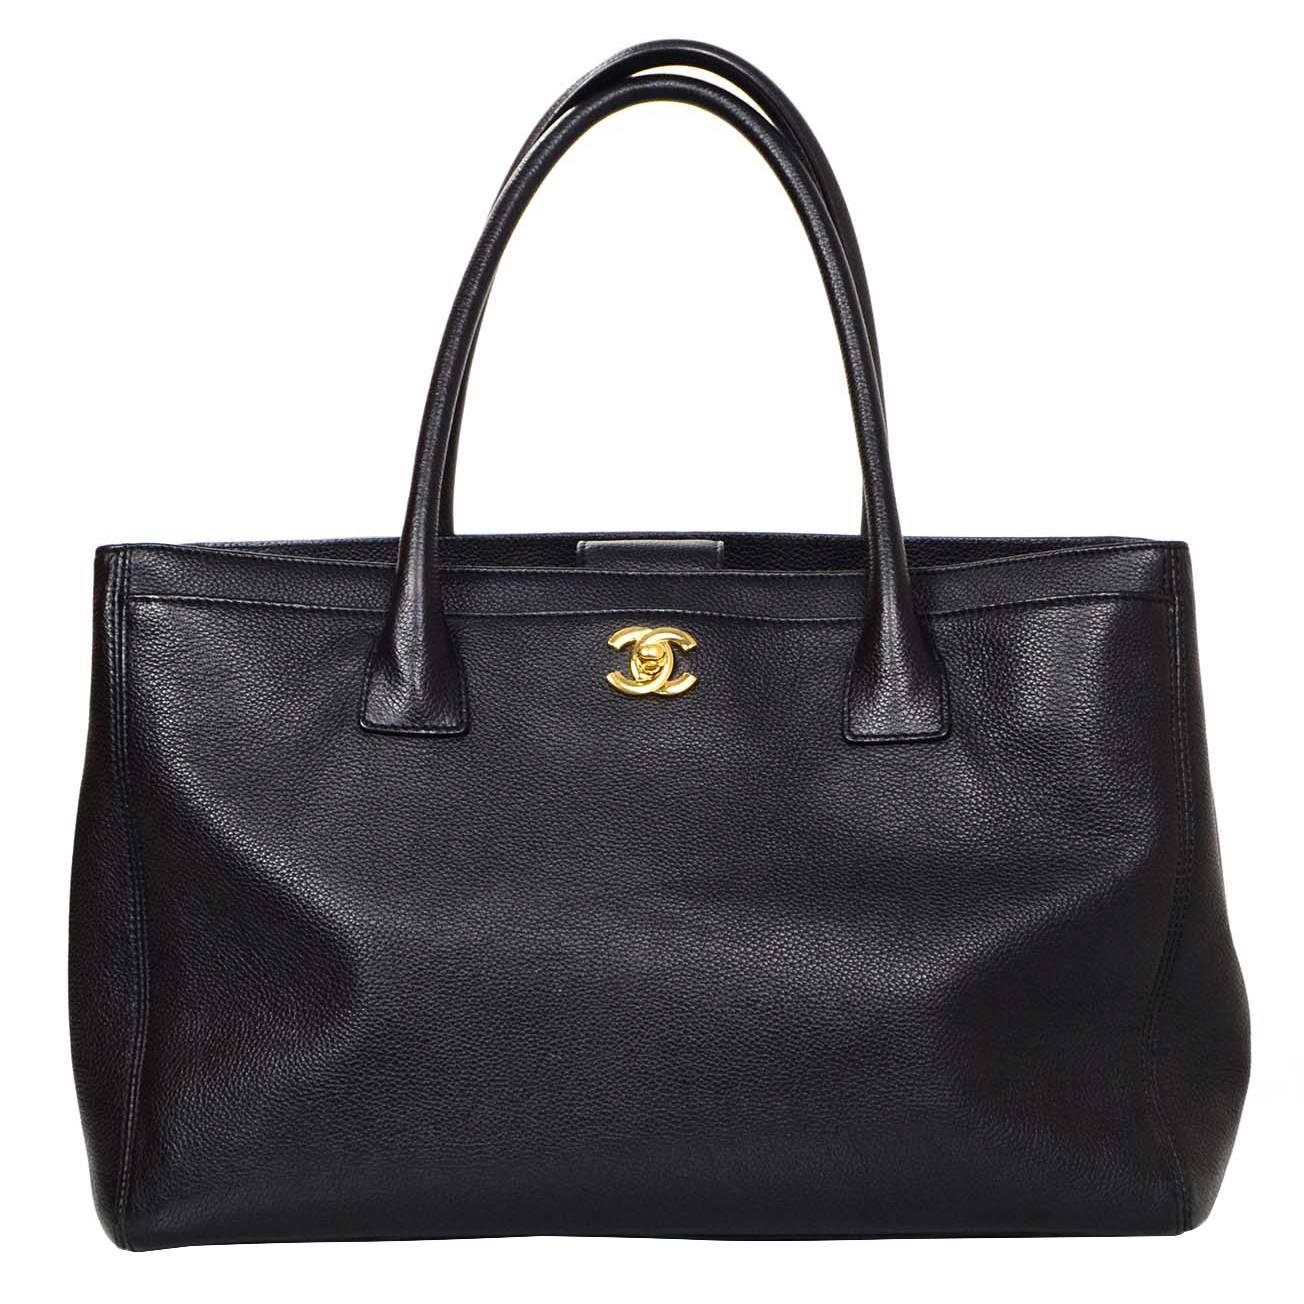 Chanel Black Leather Cerf Executive Tote Bag w/ Strap